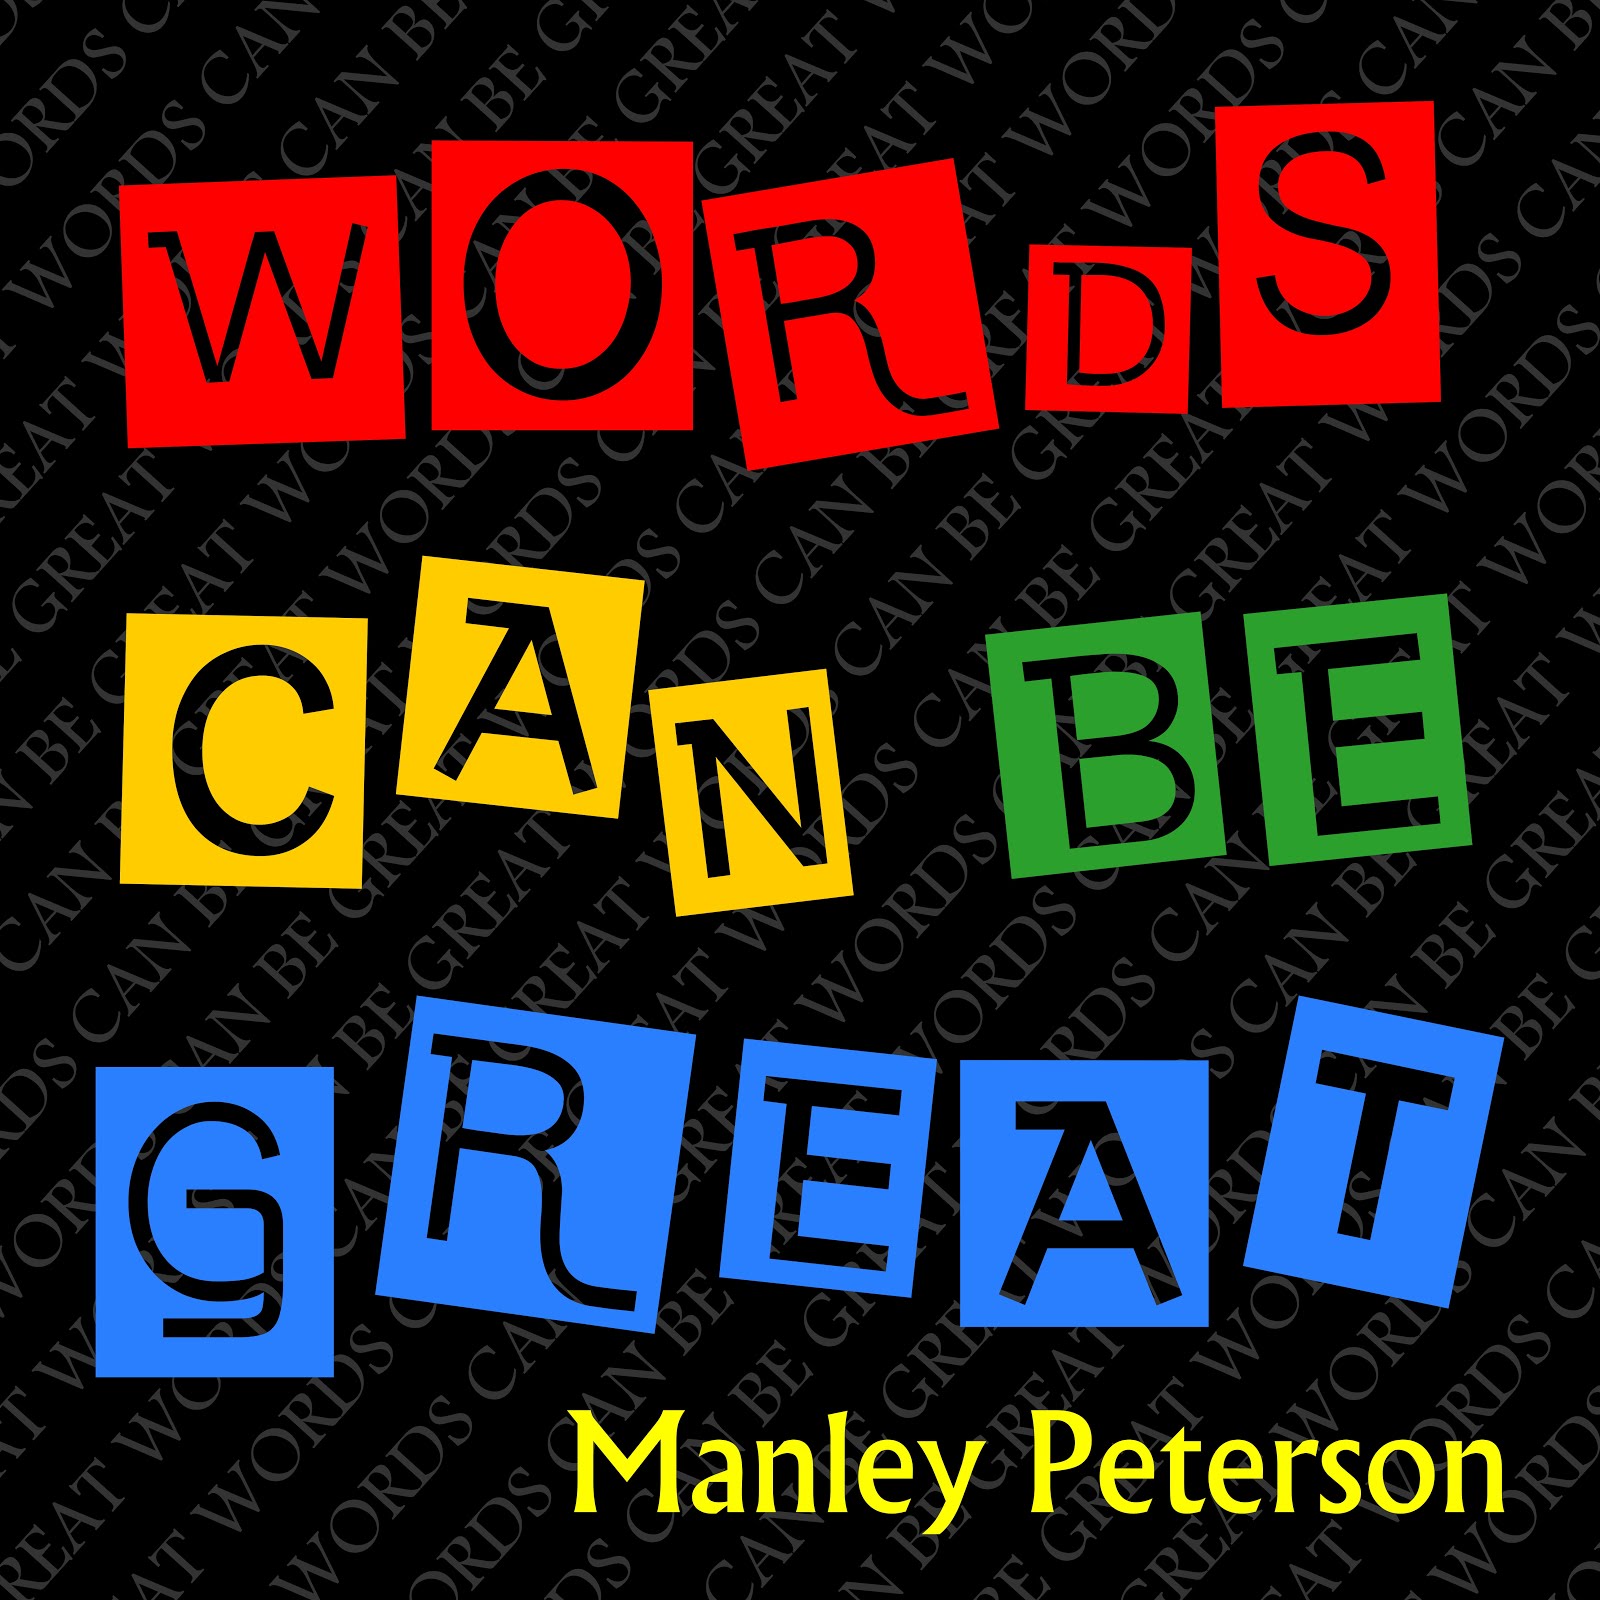 Words Can Be Great